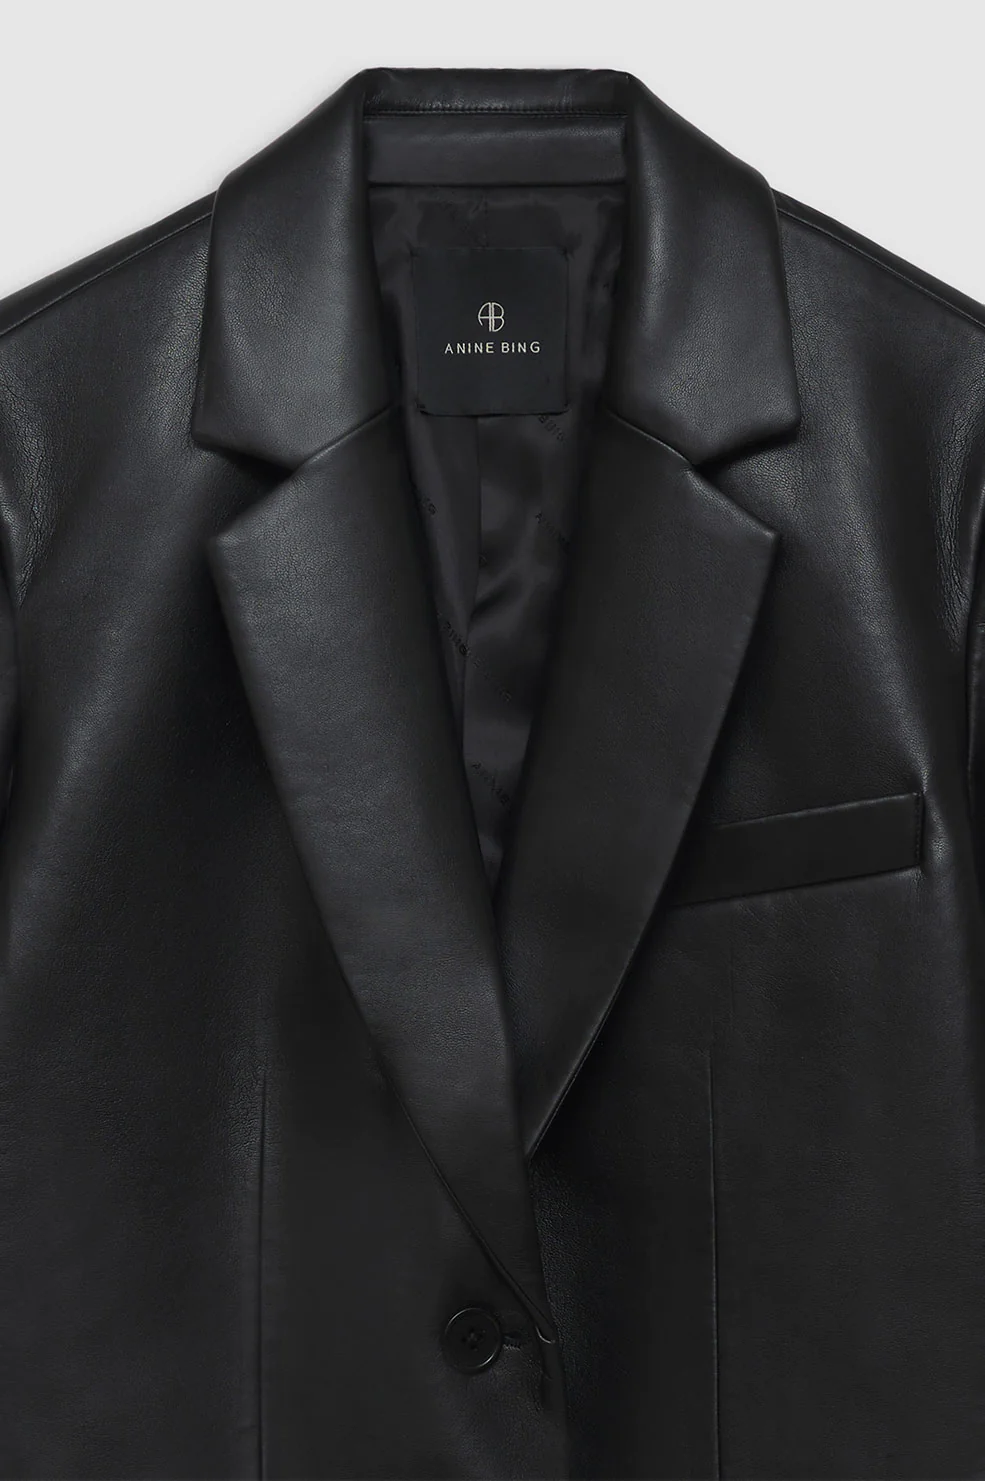 ANINE BING Classic Blazer Black Recycled Leather available at TNT The New Trend Australia.